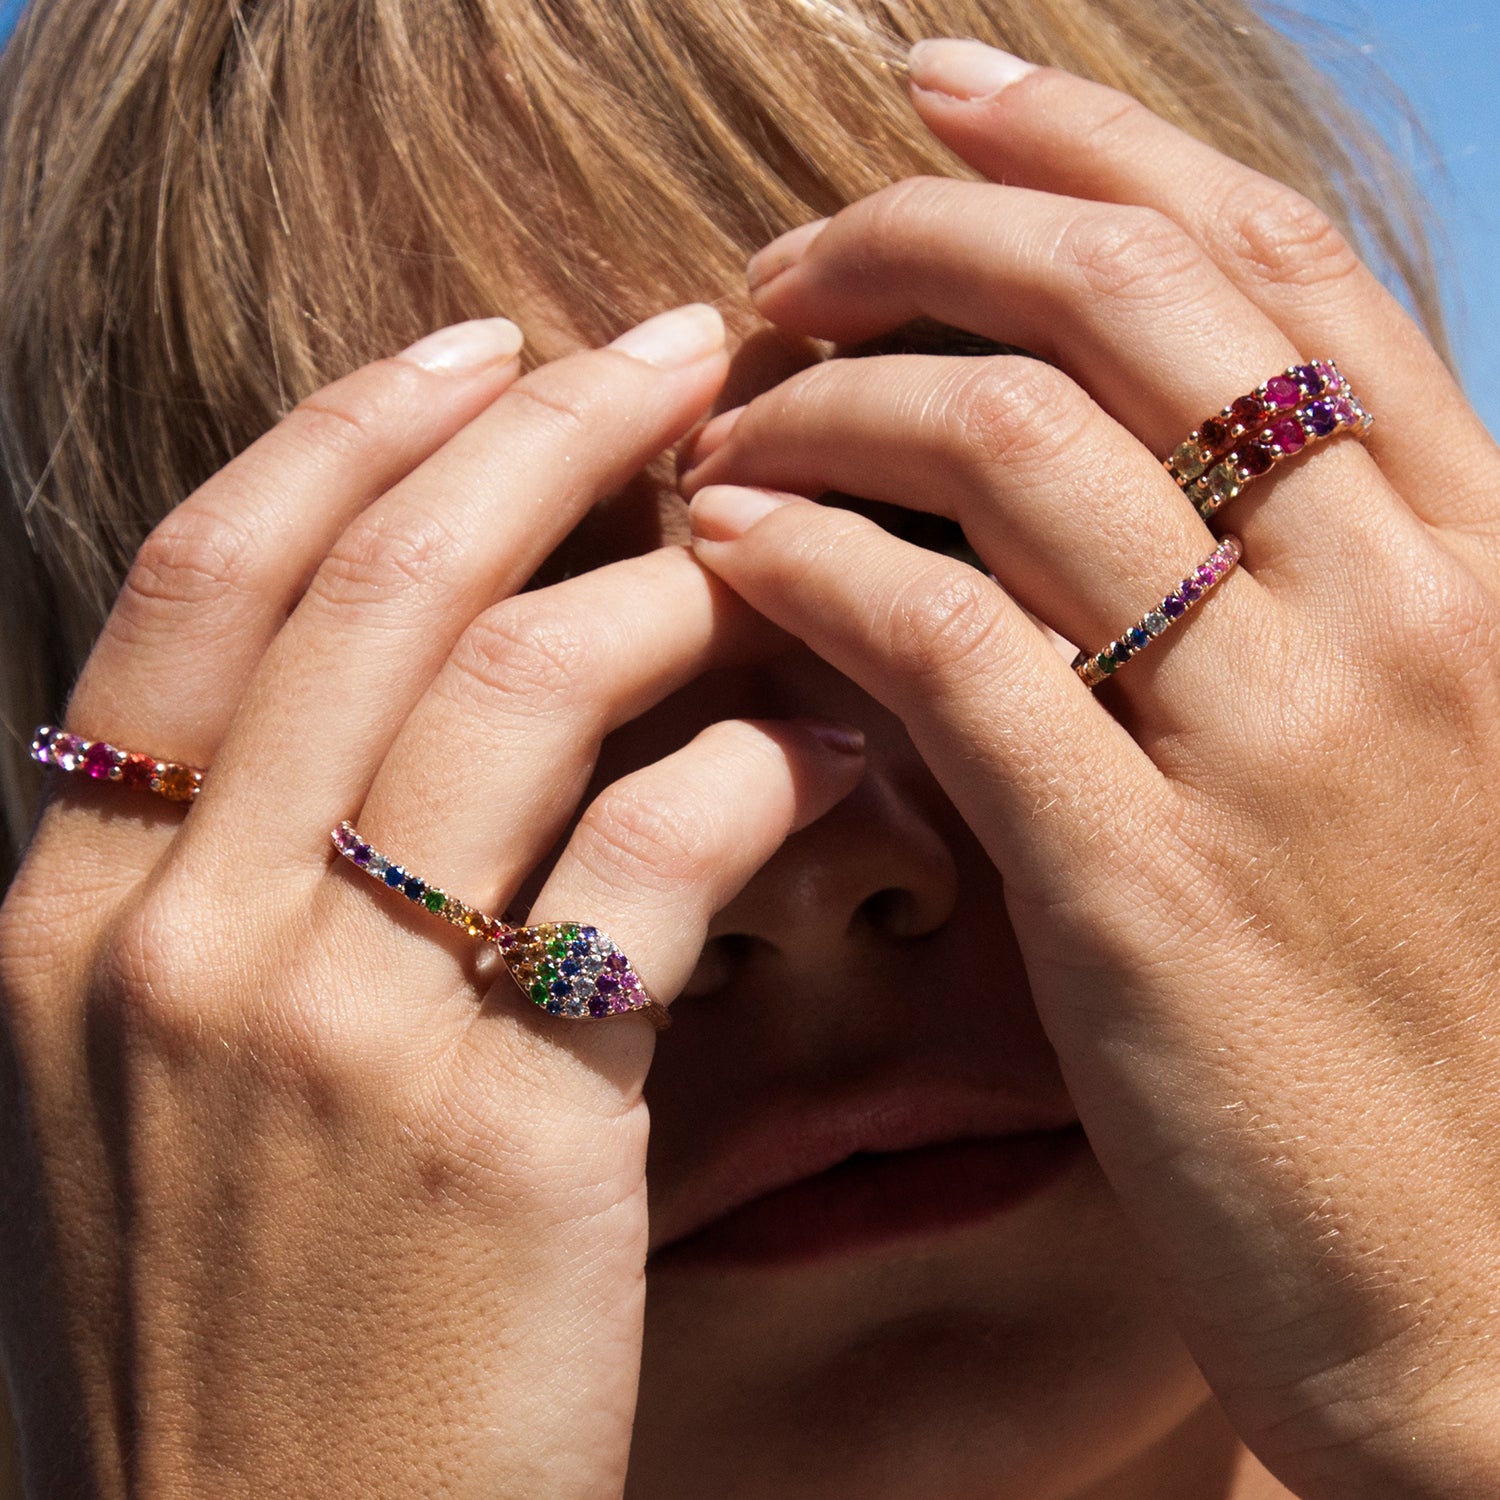 The Rainbow Gemma Pinky Ring shown making a colorful statement with our Rainbow Bands and Rainbow Eternity Bands on each hand.